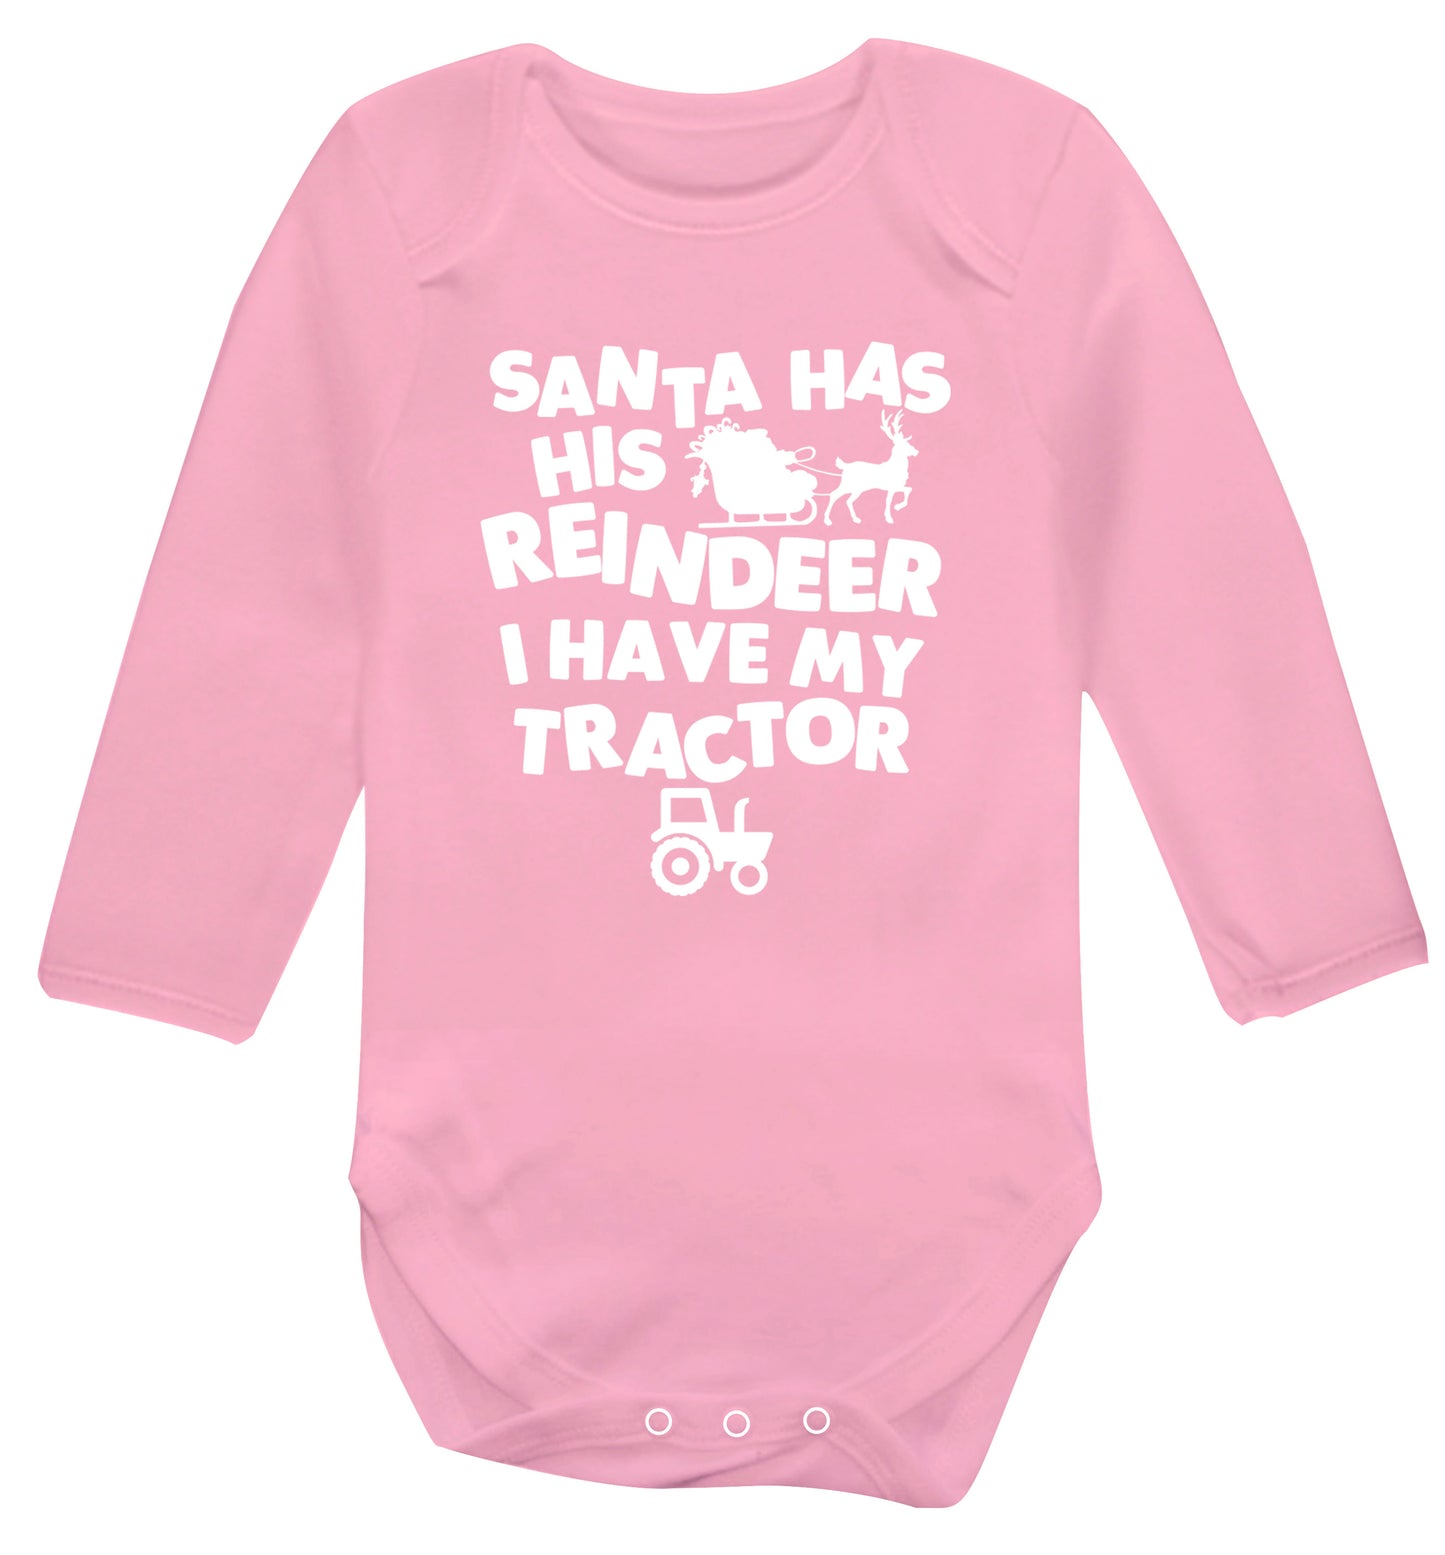 Santa has his reindeer I have my tractor Baby Vest long sleeved pale pink 6-12 months